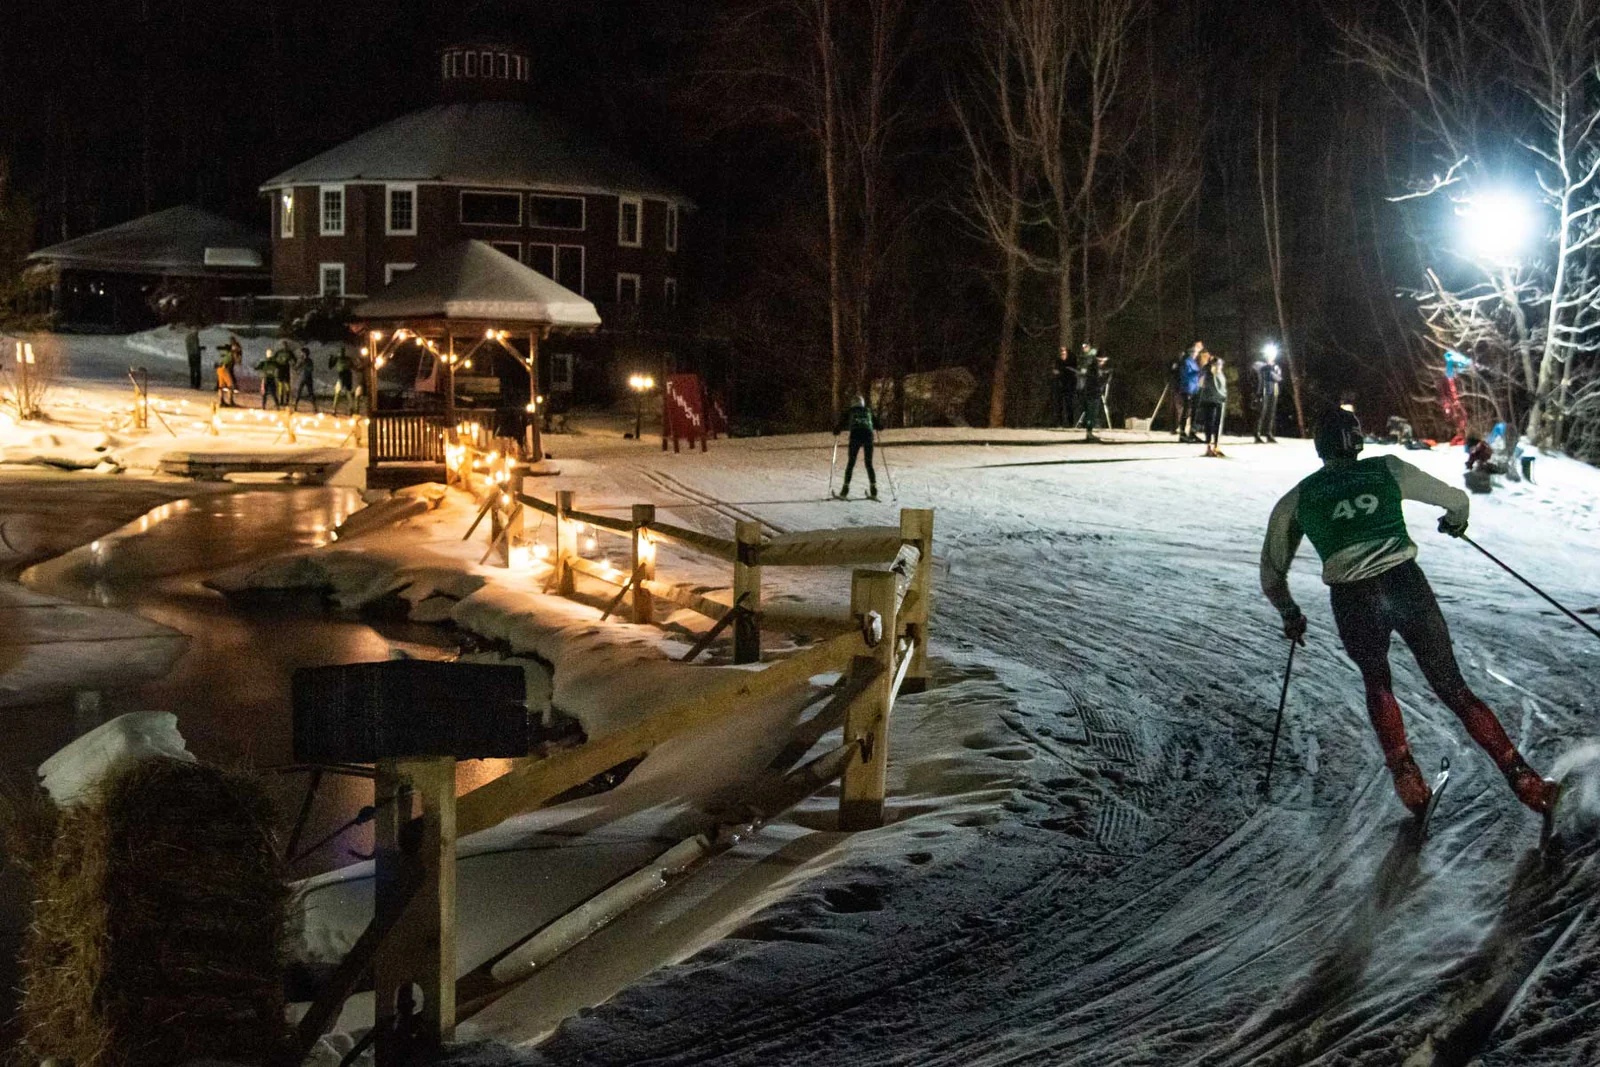 Night skiing at Sleepy Hollow with skier under the lights at the Wednesday Night Race Series